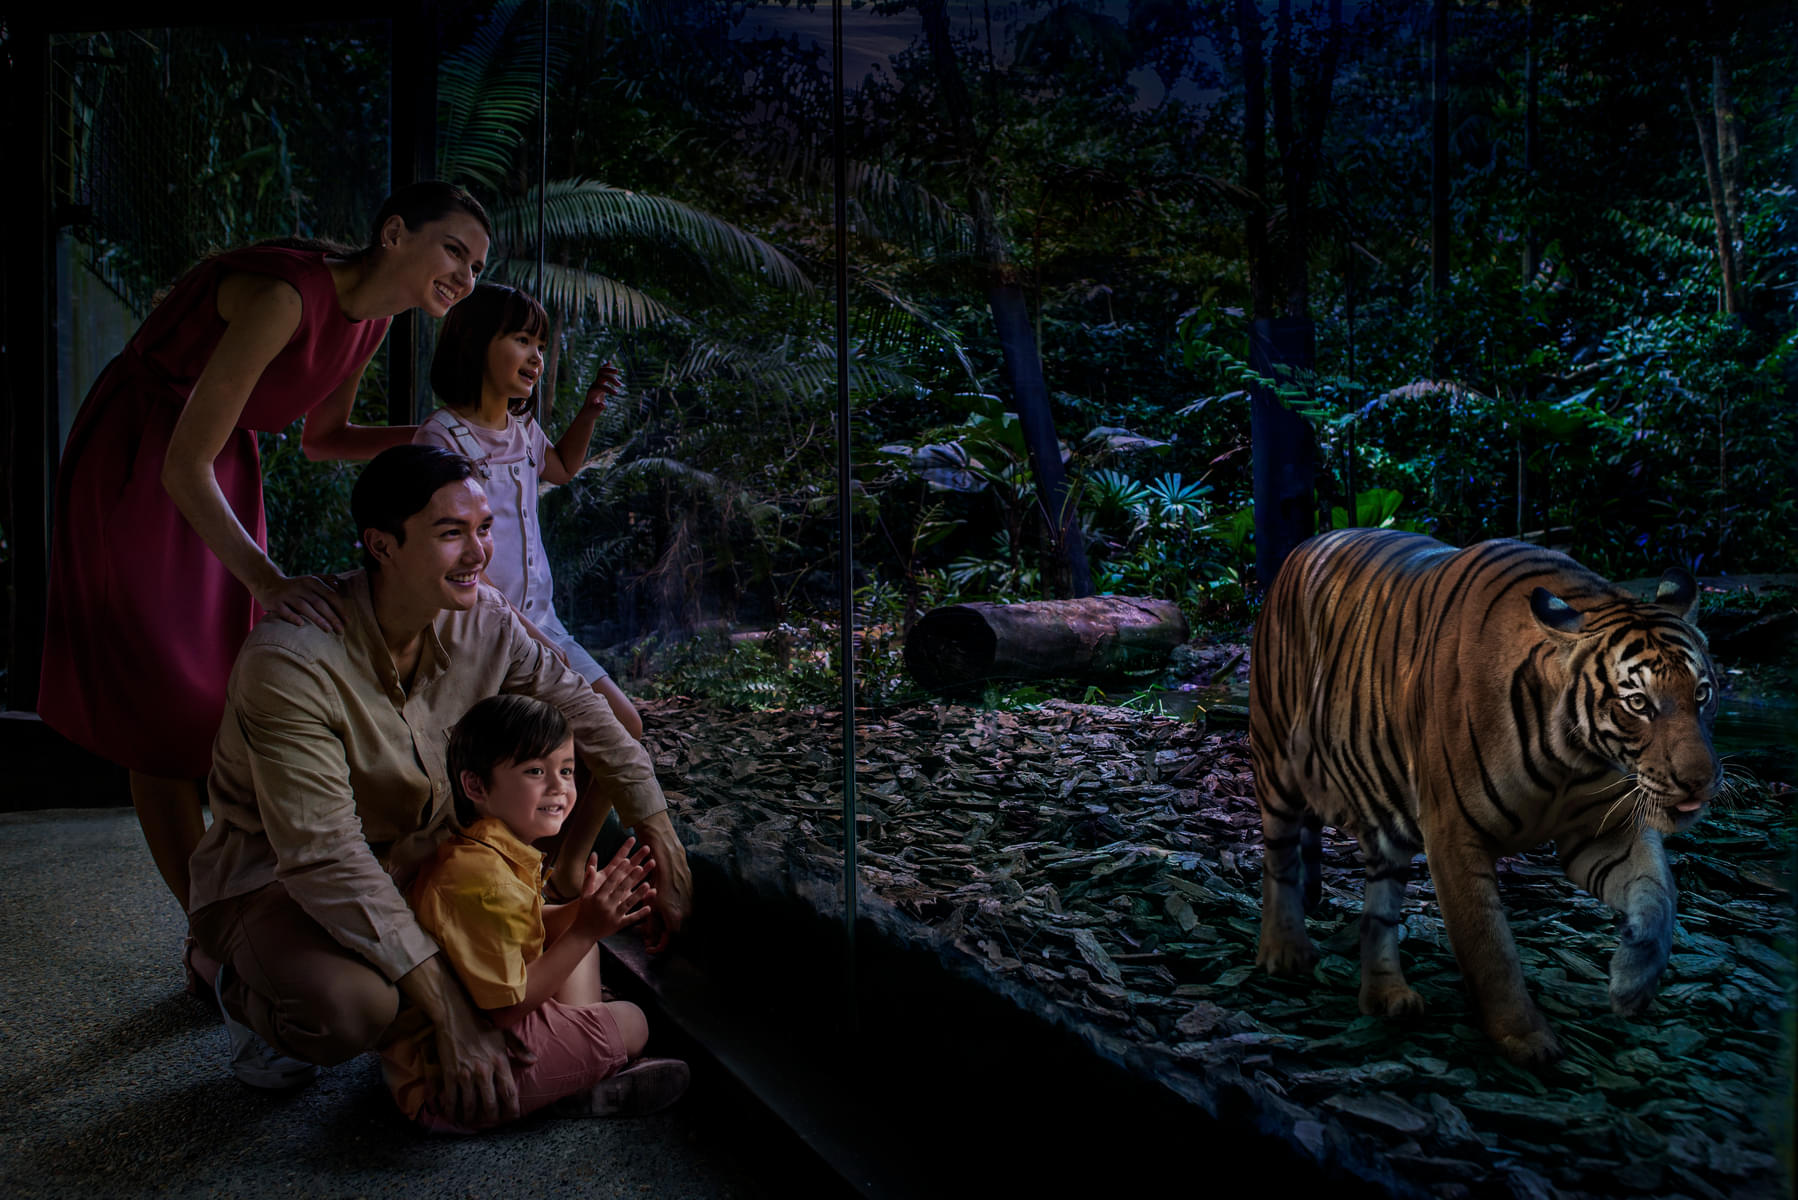 Look at the majestic tigers roaming in their enclosures